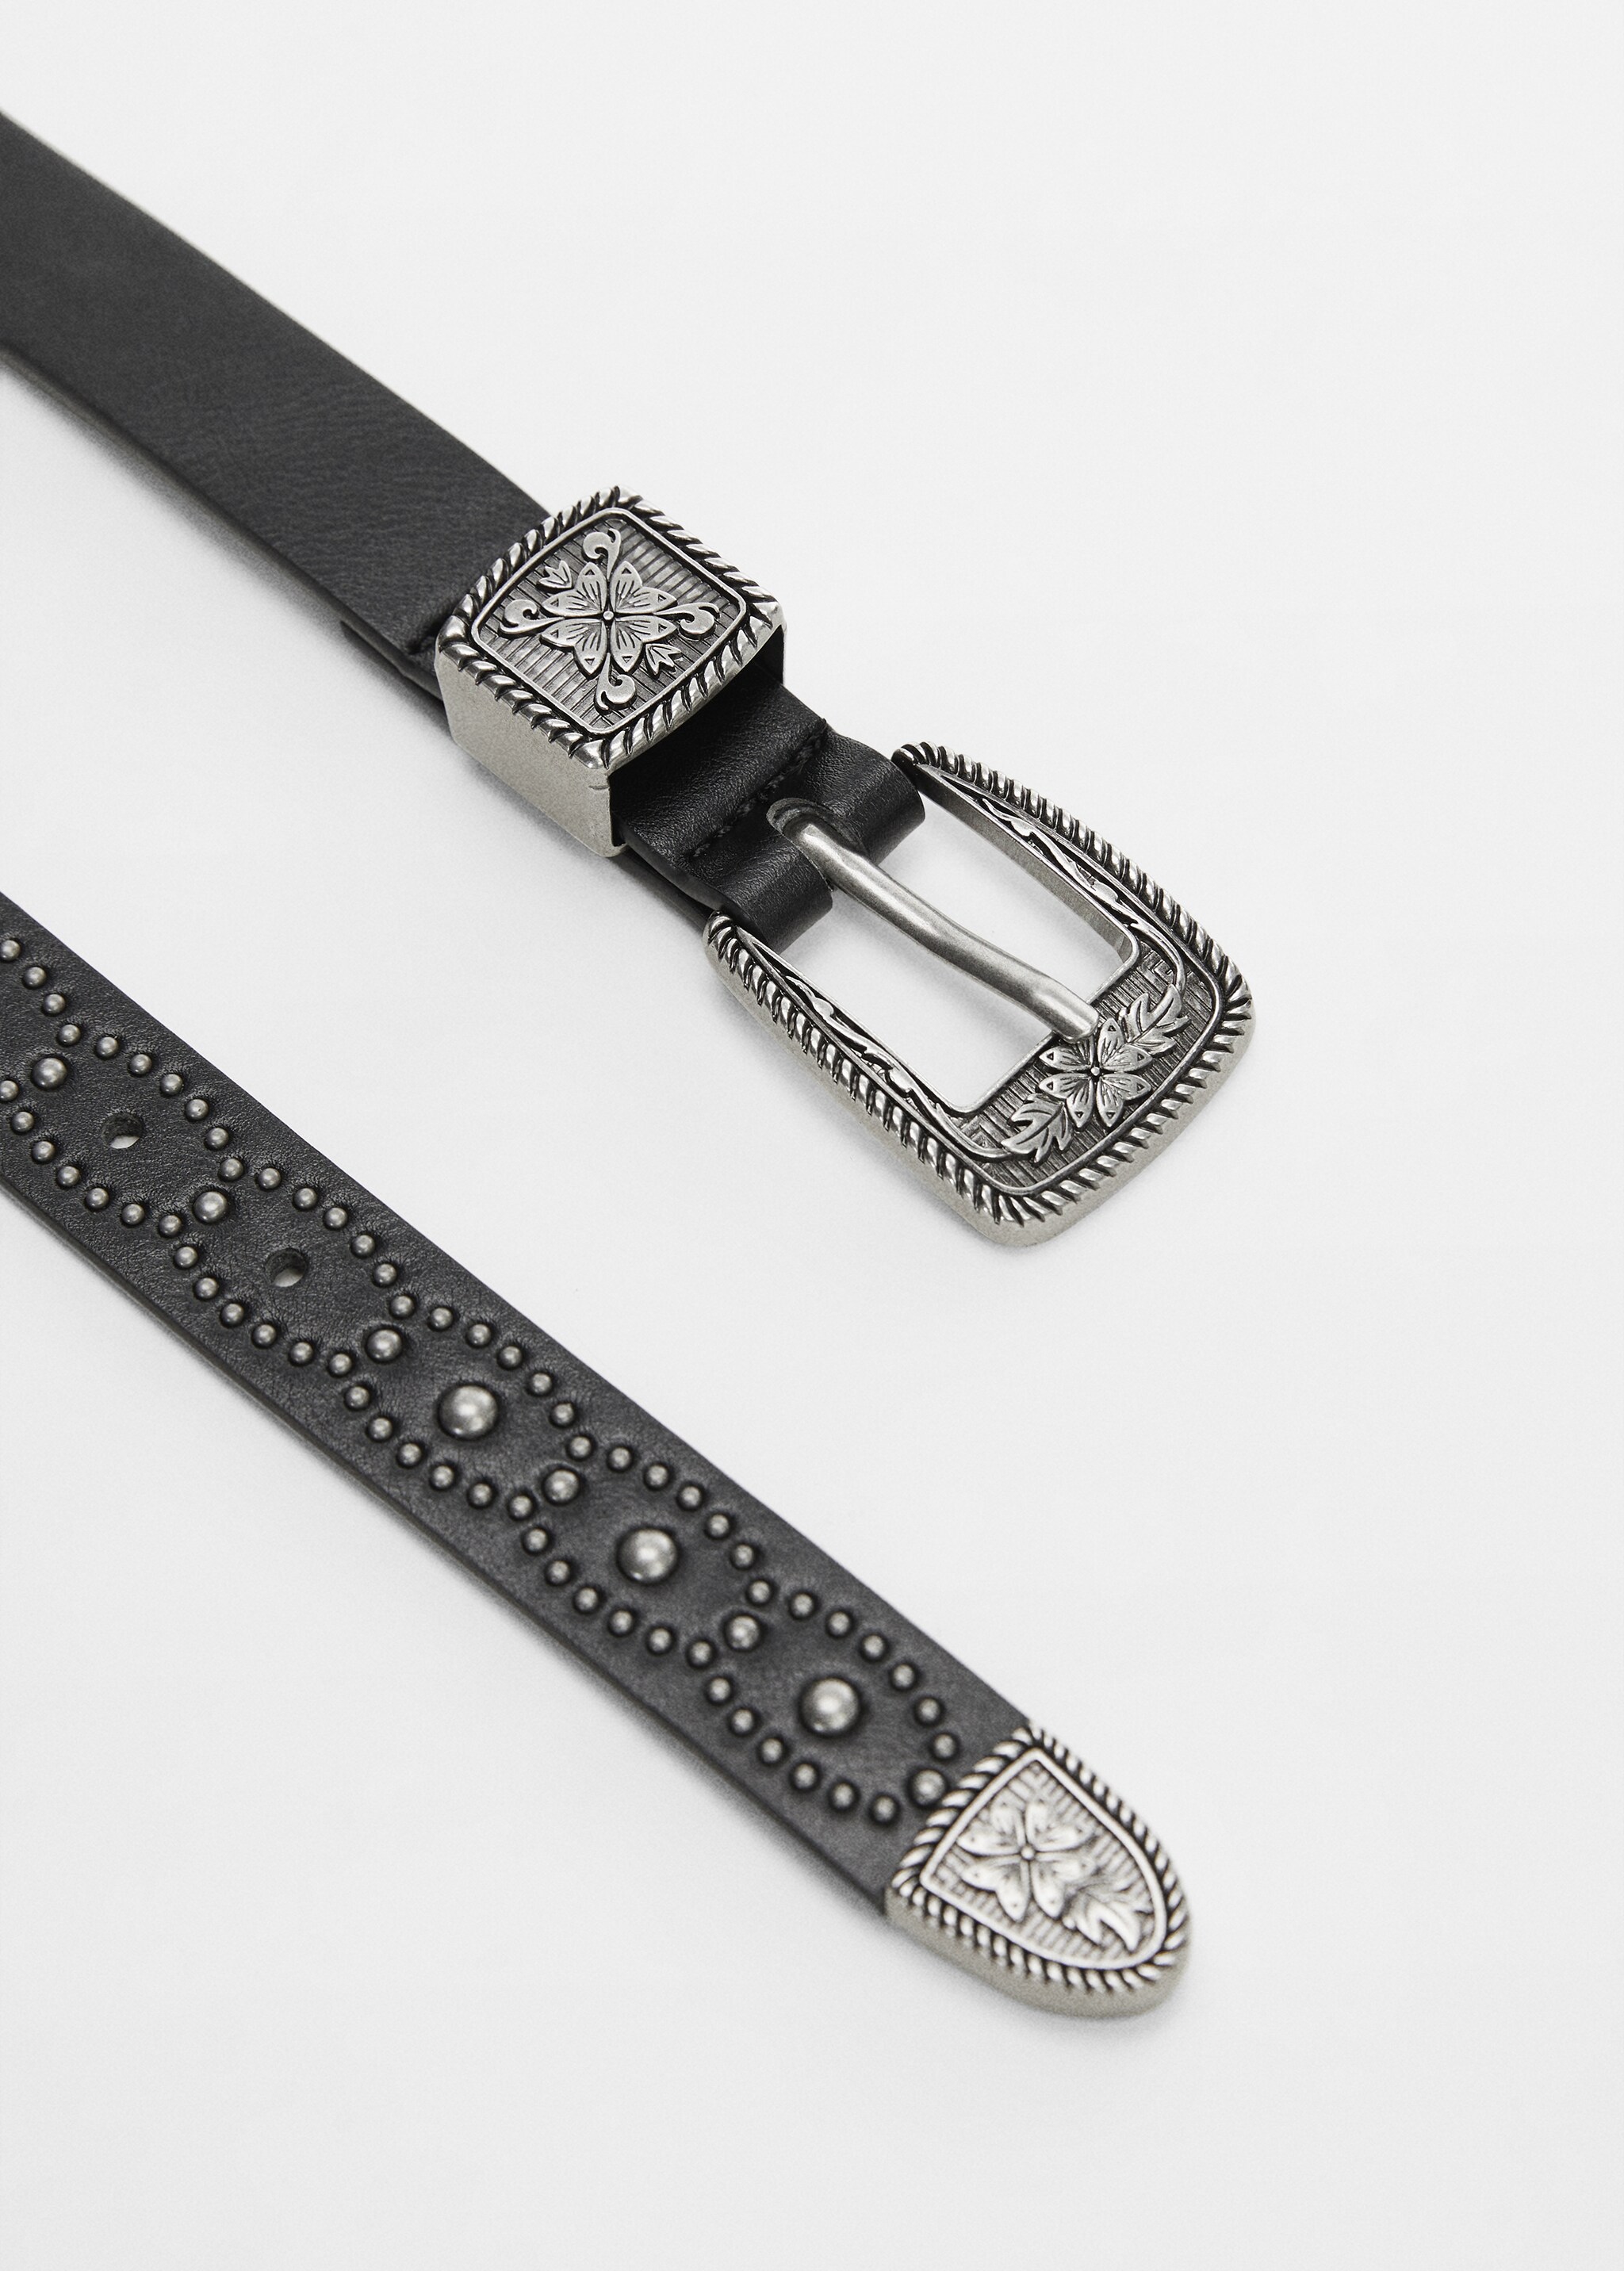 Engraved buckle belt - Details of the article 1